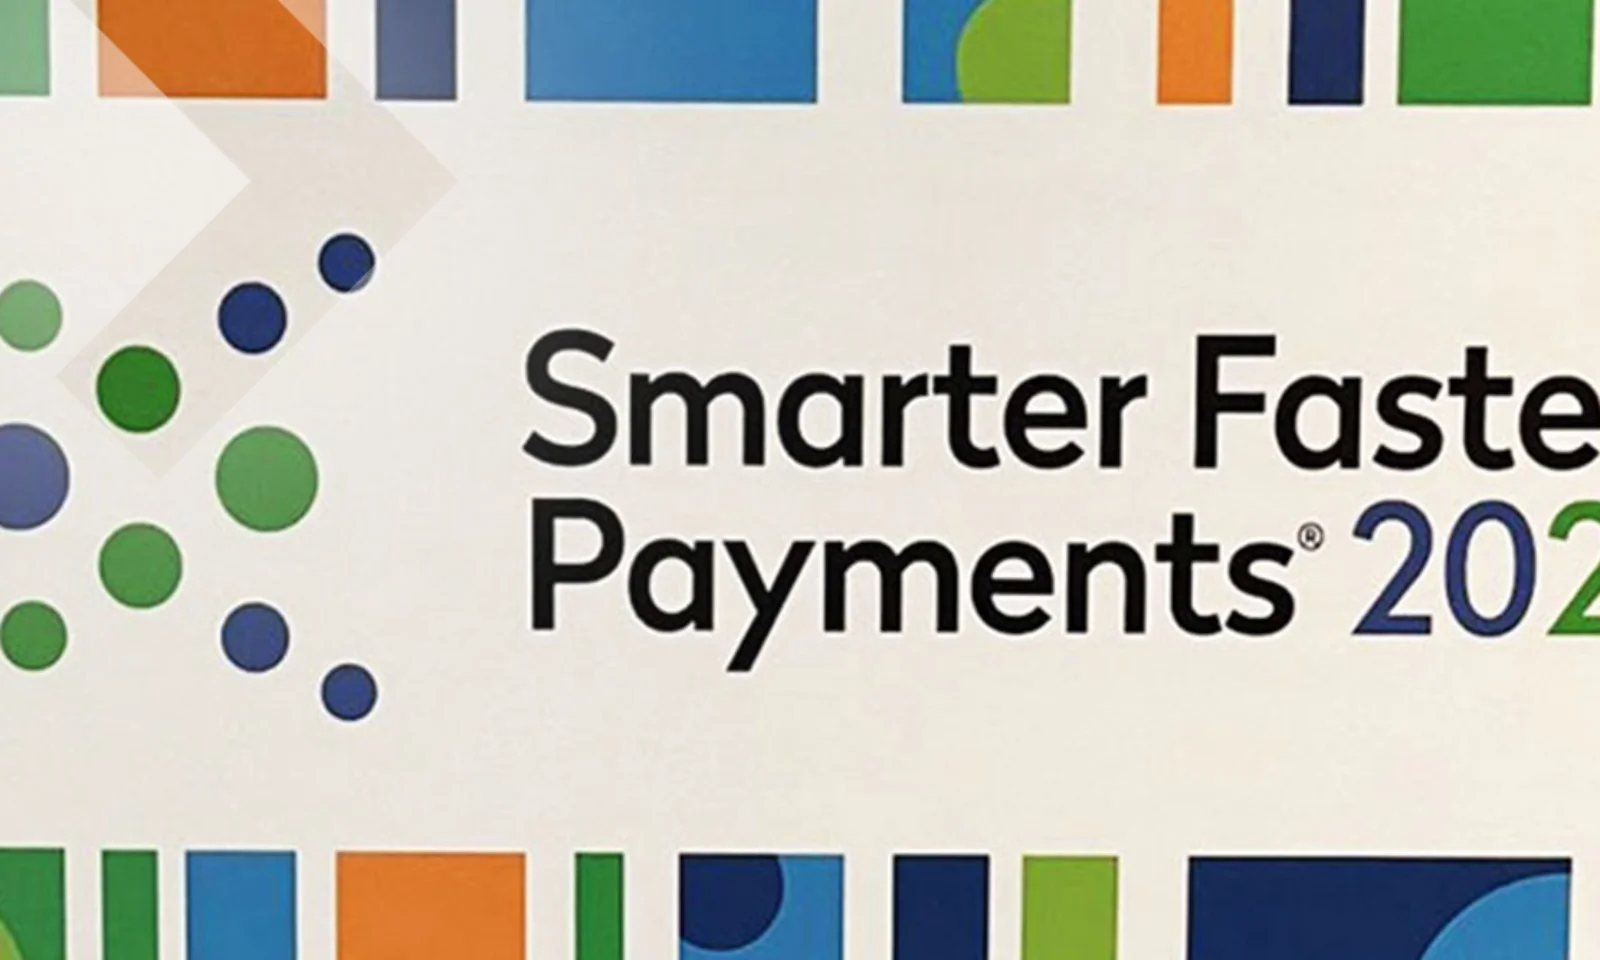 In case you missed it: Gain insights from Nacha Smarter Faster Payments on our US blog. Stay updated on payment innovations.